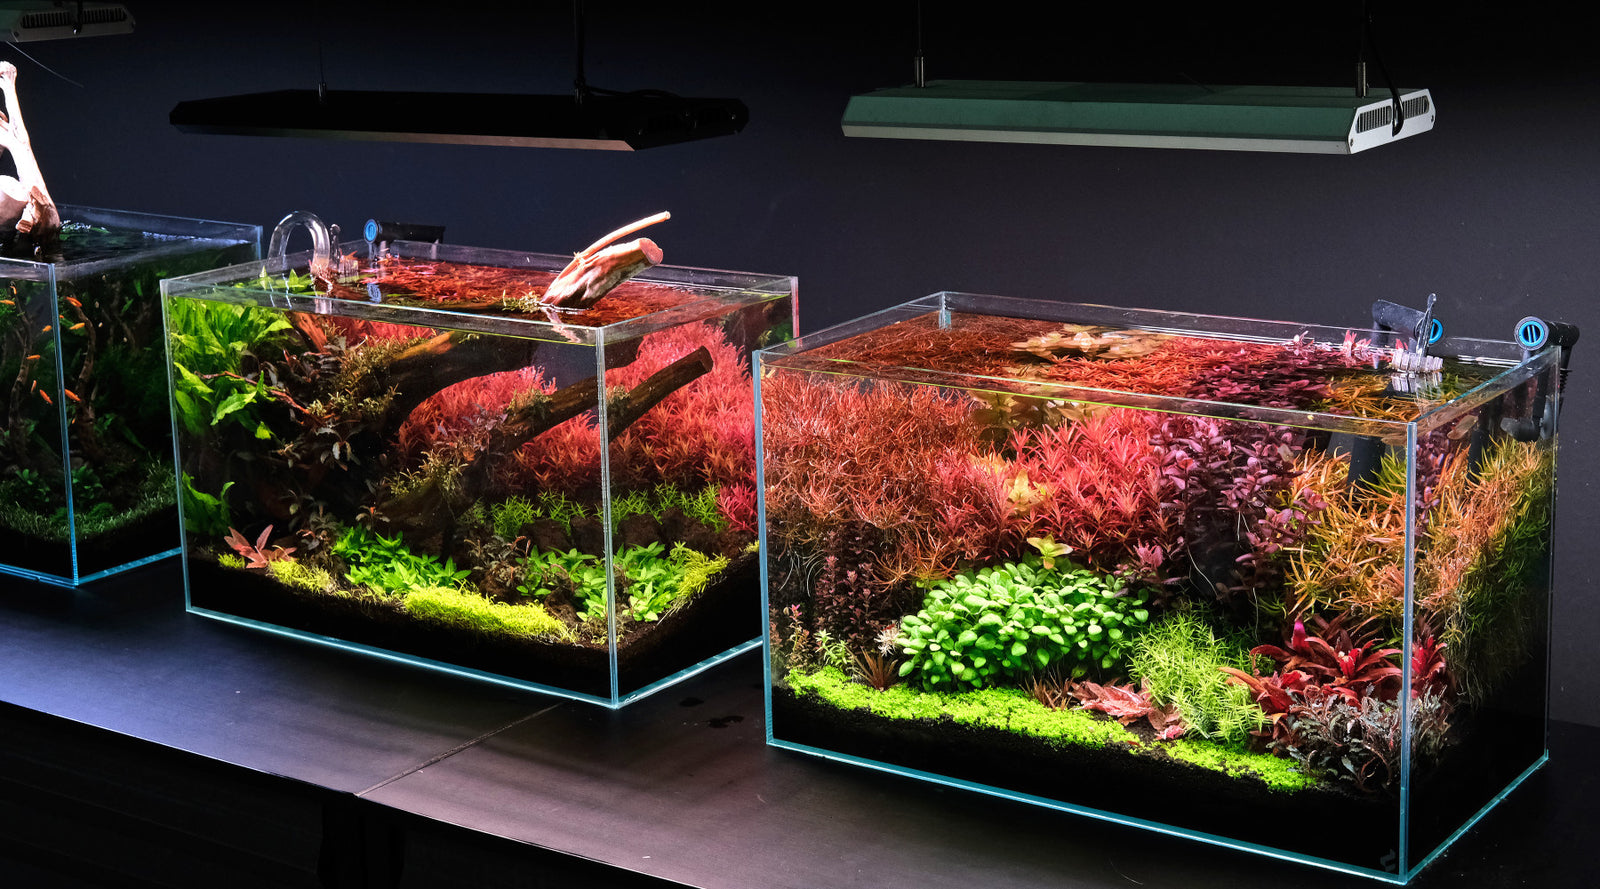 The best LED units for planted tanks in 2023